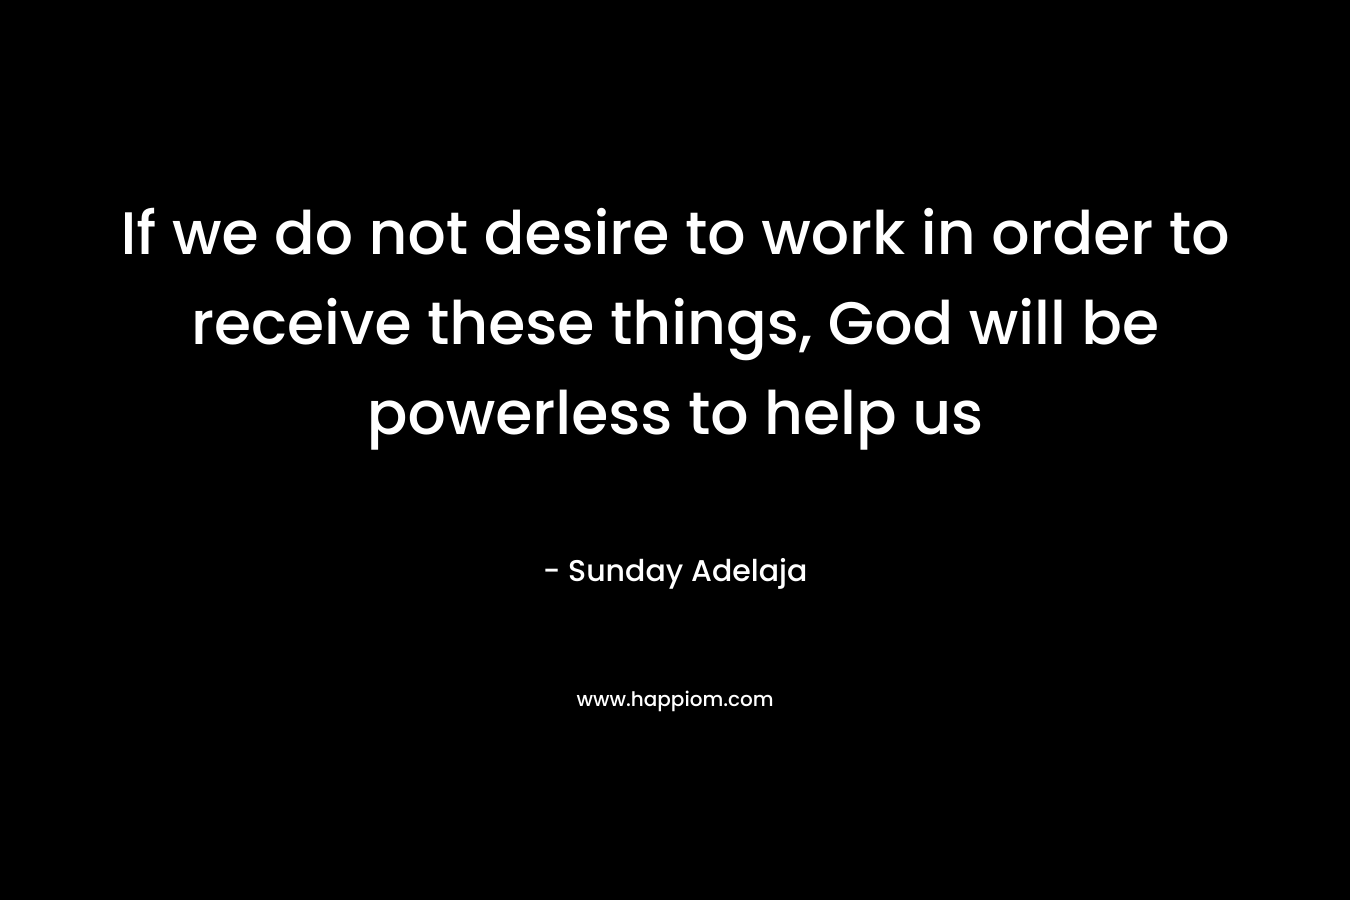 If we do not desire to work in order to receive these things, God will be powerless to help us